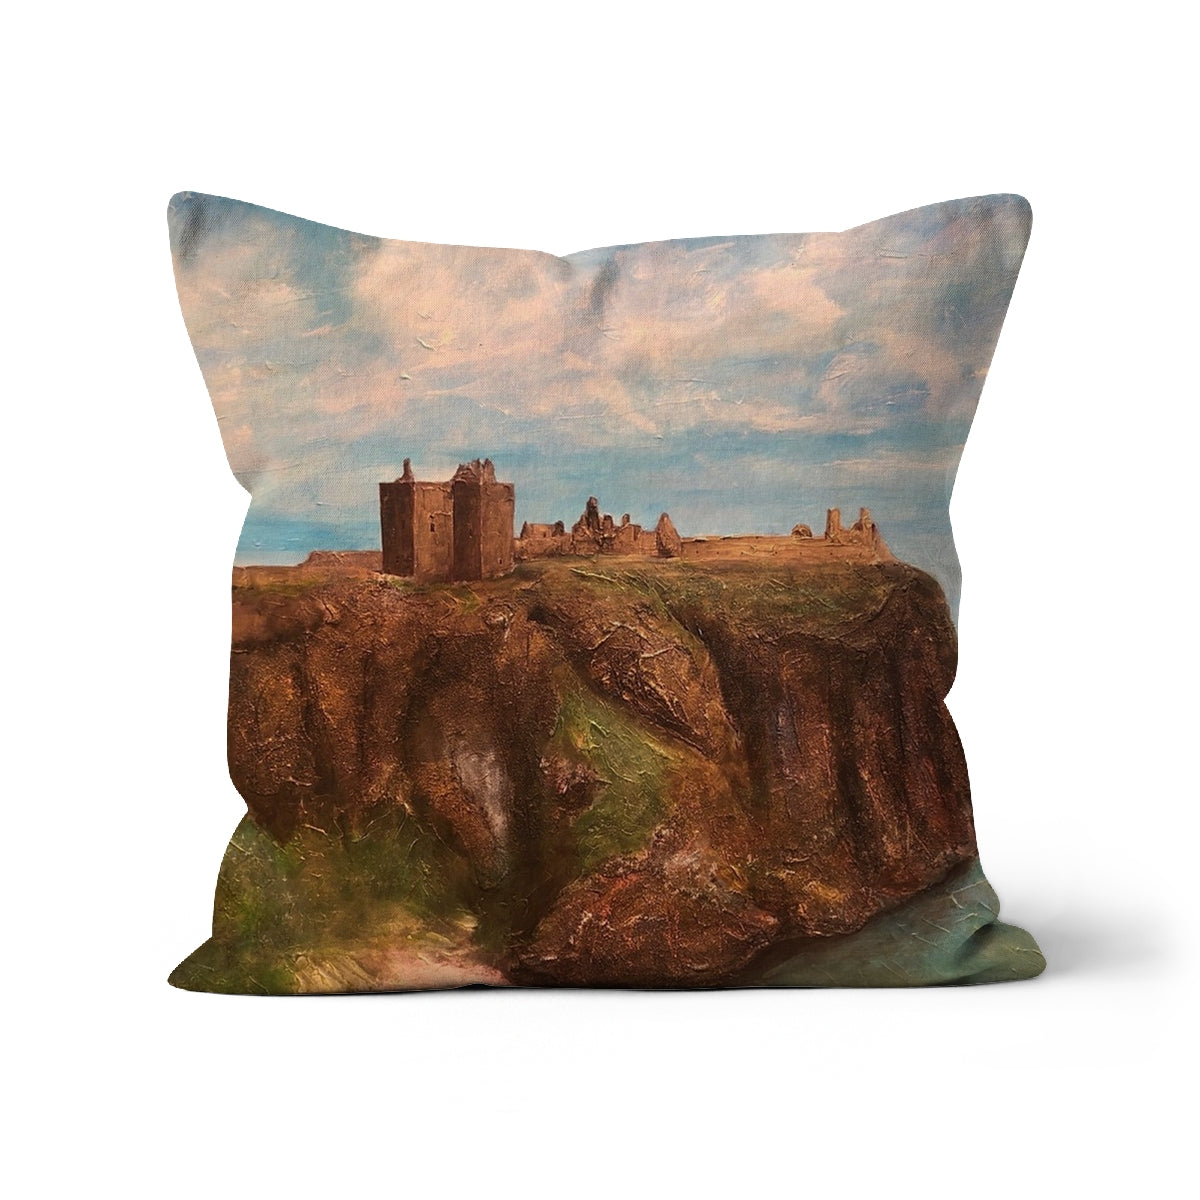 Dunnottar Castle Art Gifts Cushion-Homeware-Prodigi-Faux Suede-24"x24"-Paintings, Prints, Homeware, Art Gifts From Scotland By Scottish Artist Kevin Hunter